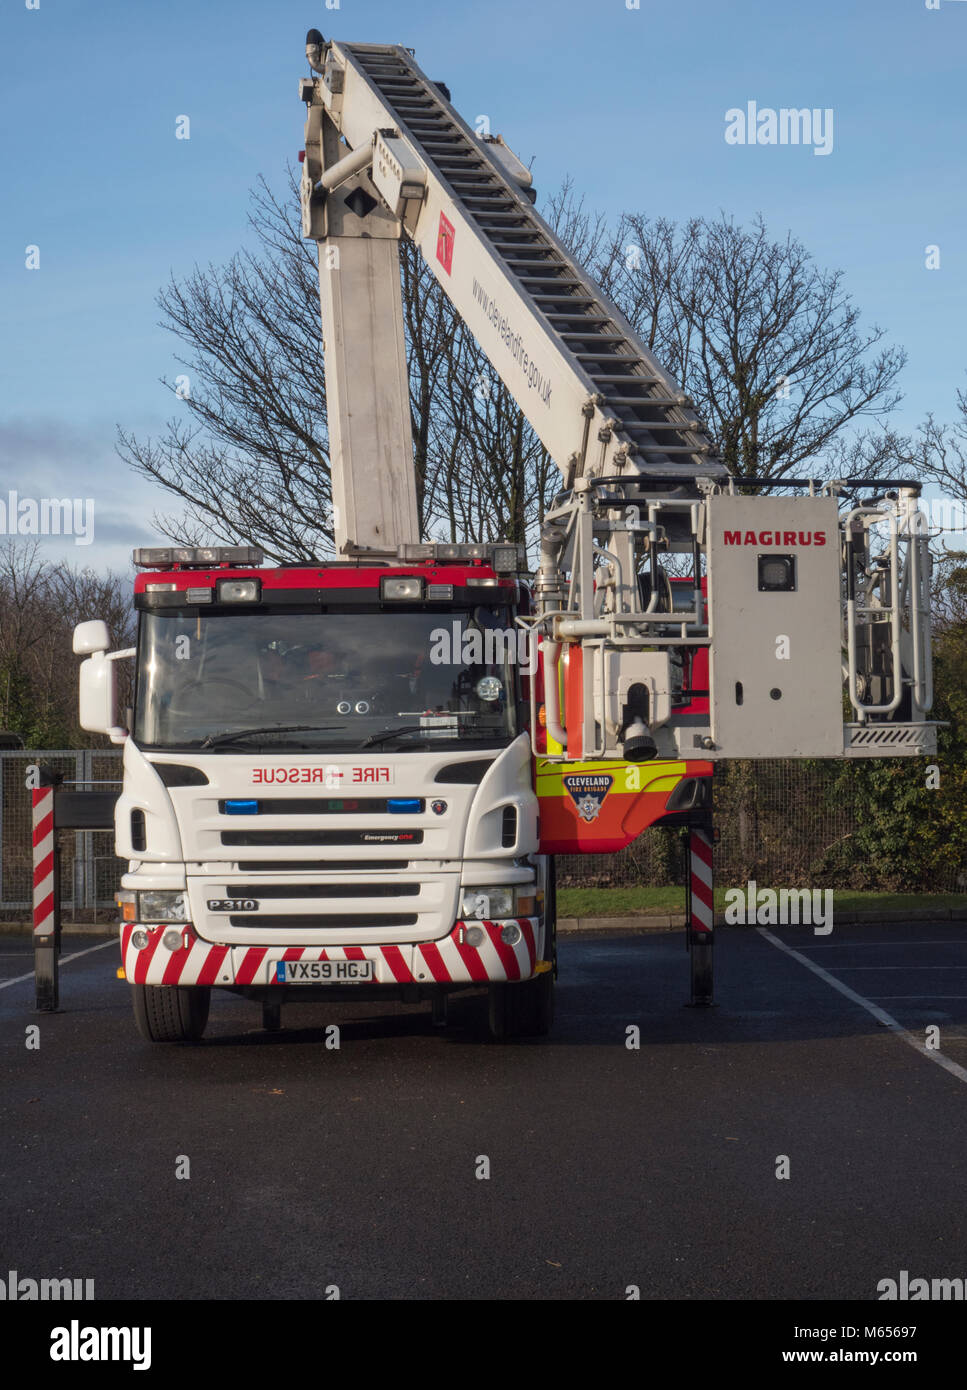 Fire appliance training using a Magirus extending platform fire appliance for evaluating multi-story buildings Stock Photo